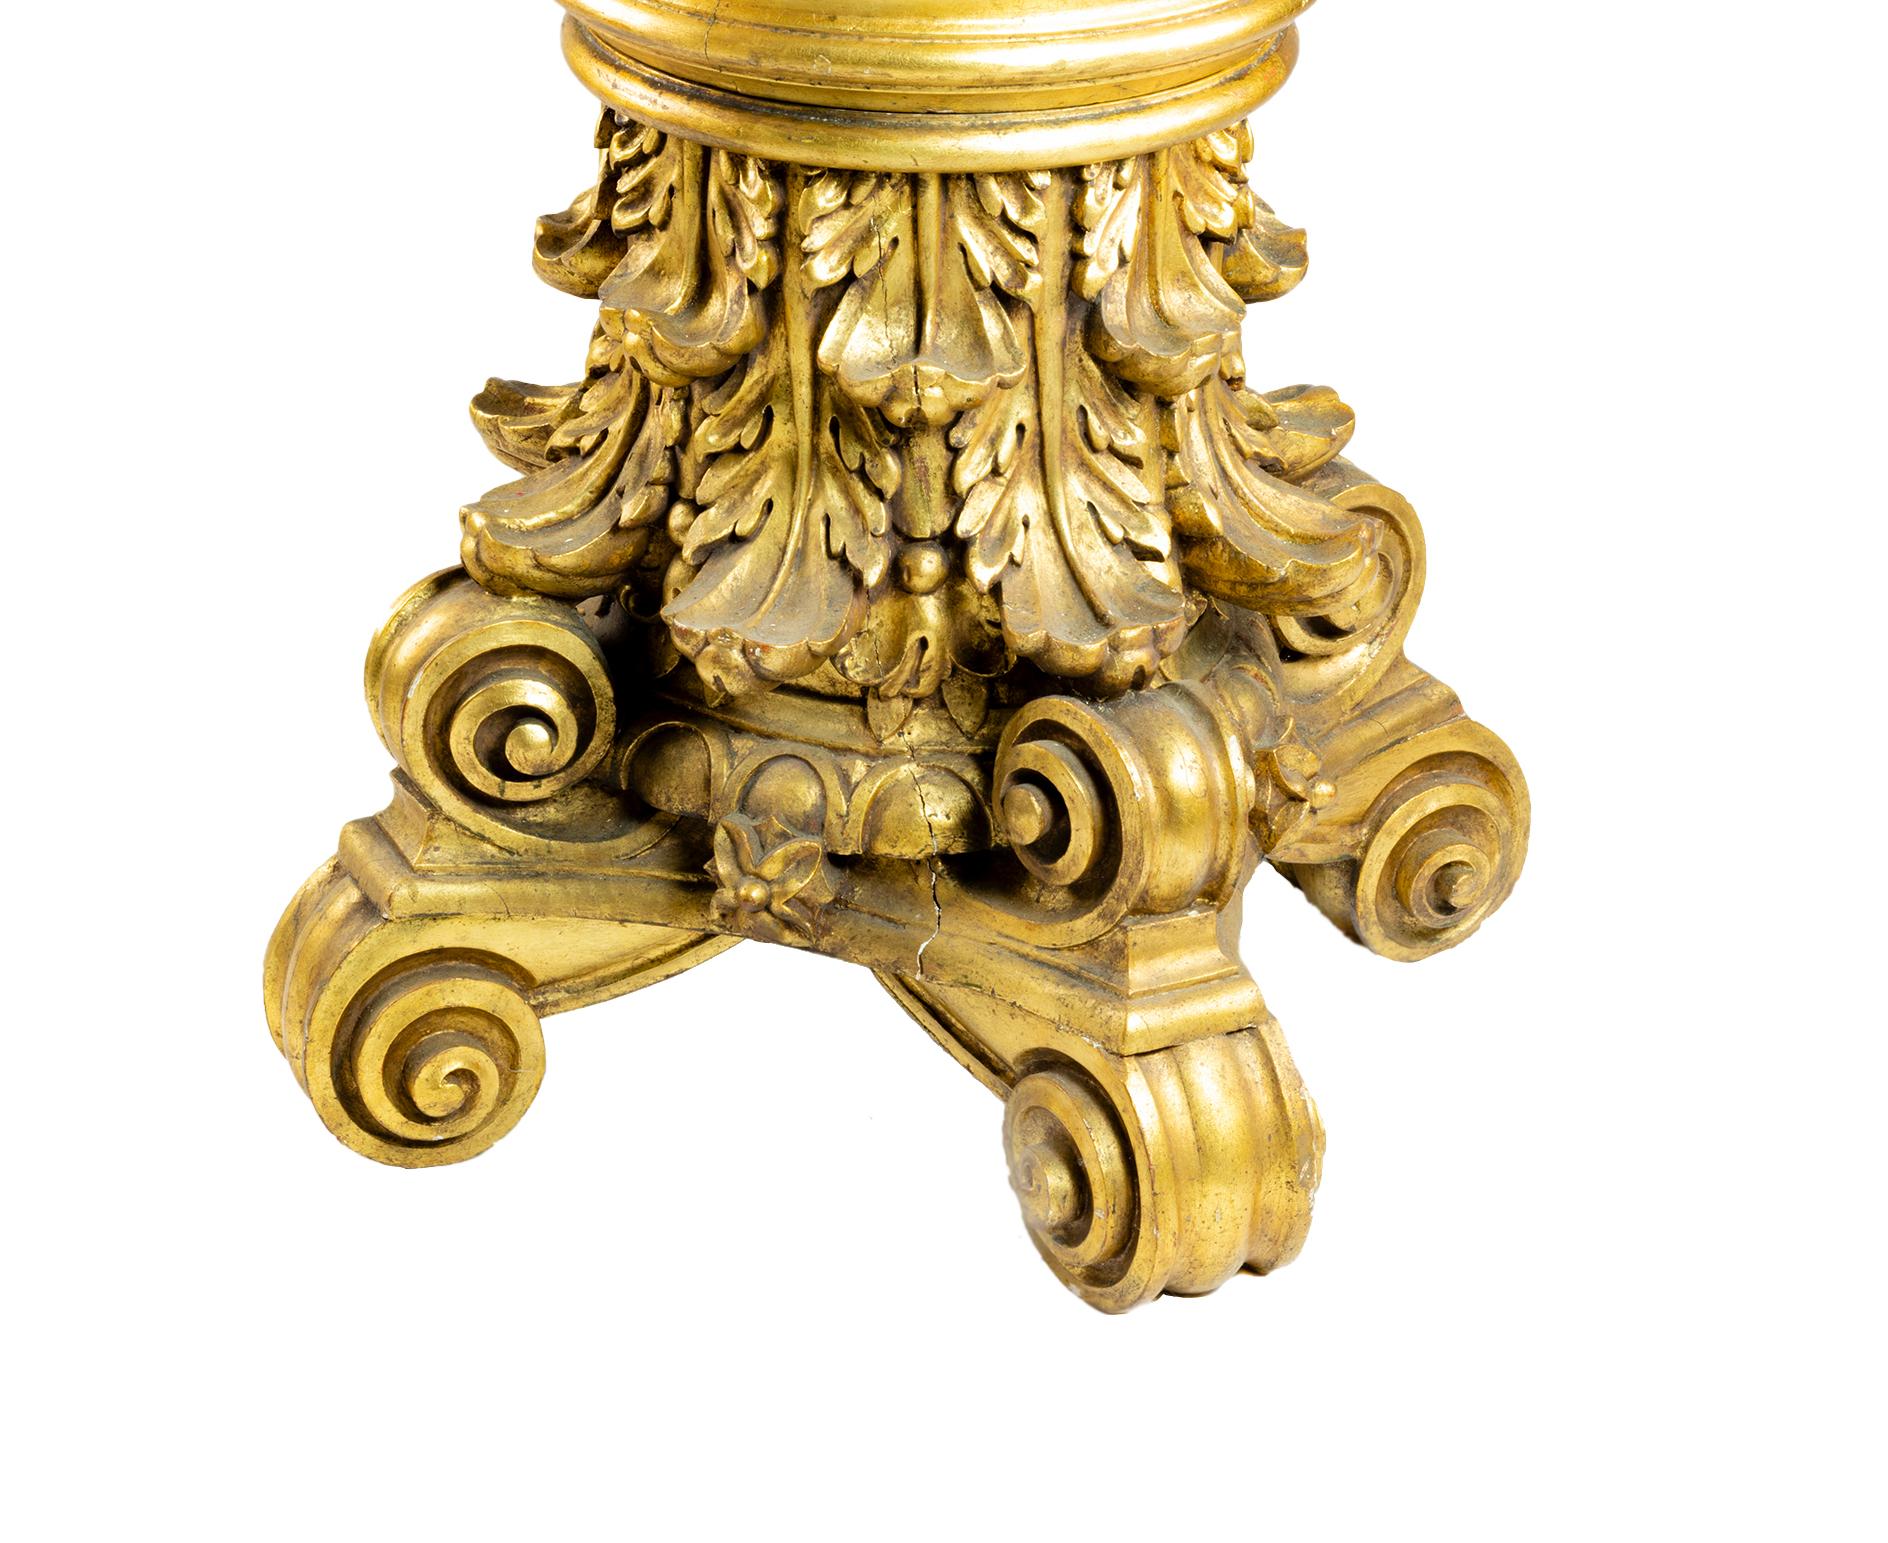 A four-legged, corinthian-style carved chestnut italian gueridon with golden leaf, acanthus and scroll rocaille, foliate and scrollwork extravagant.